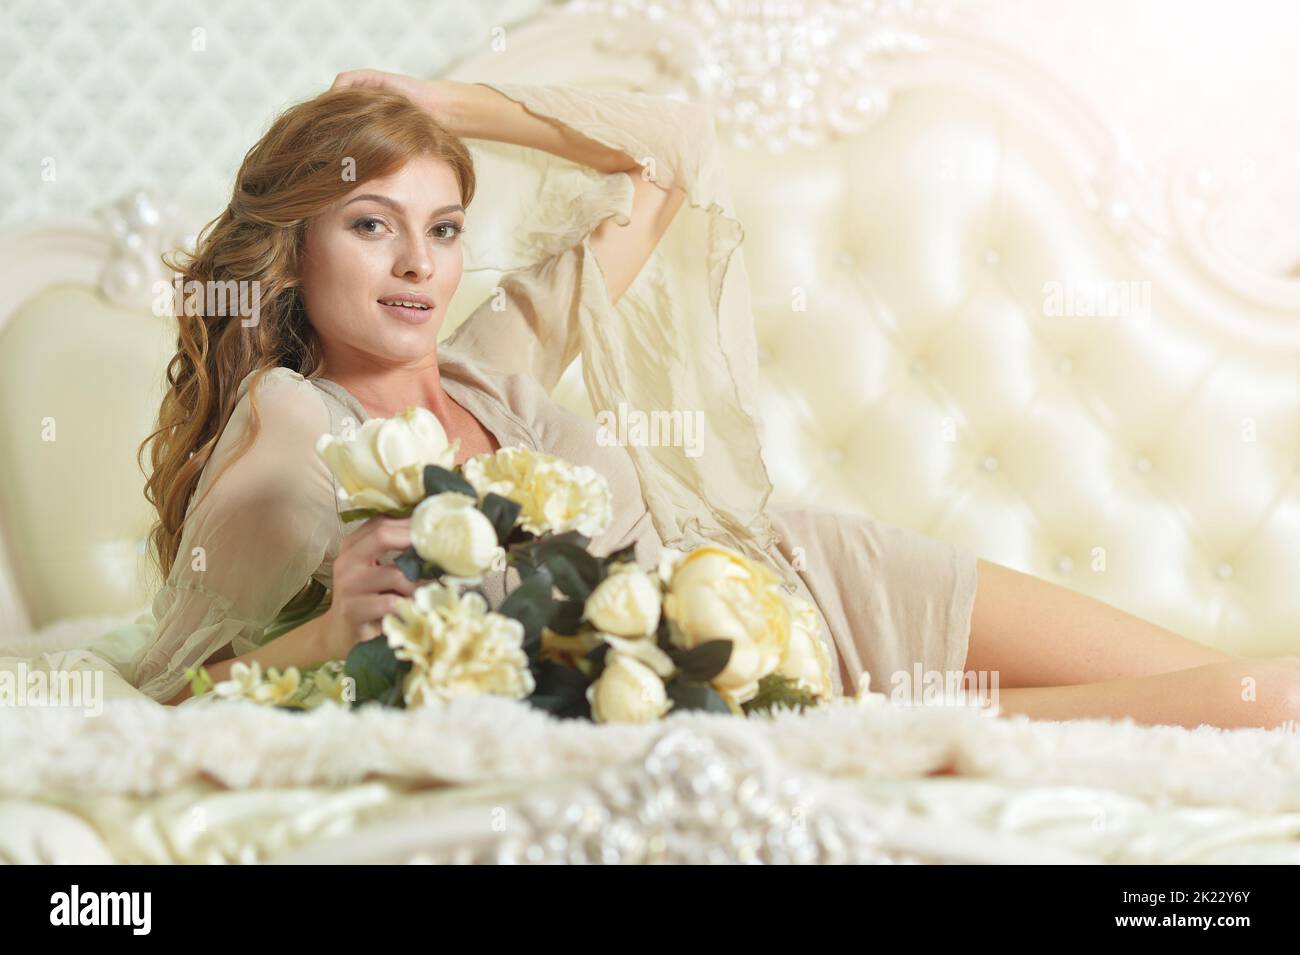 Young beautiful woman waking up on bed Stock Photo